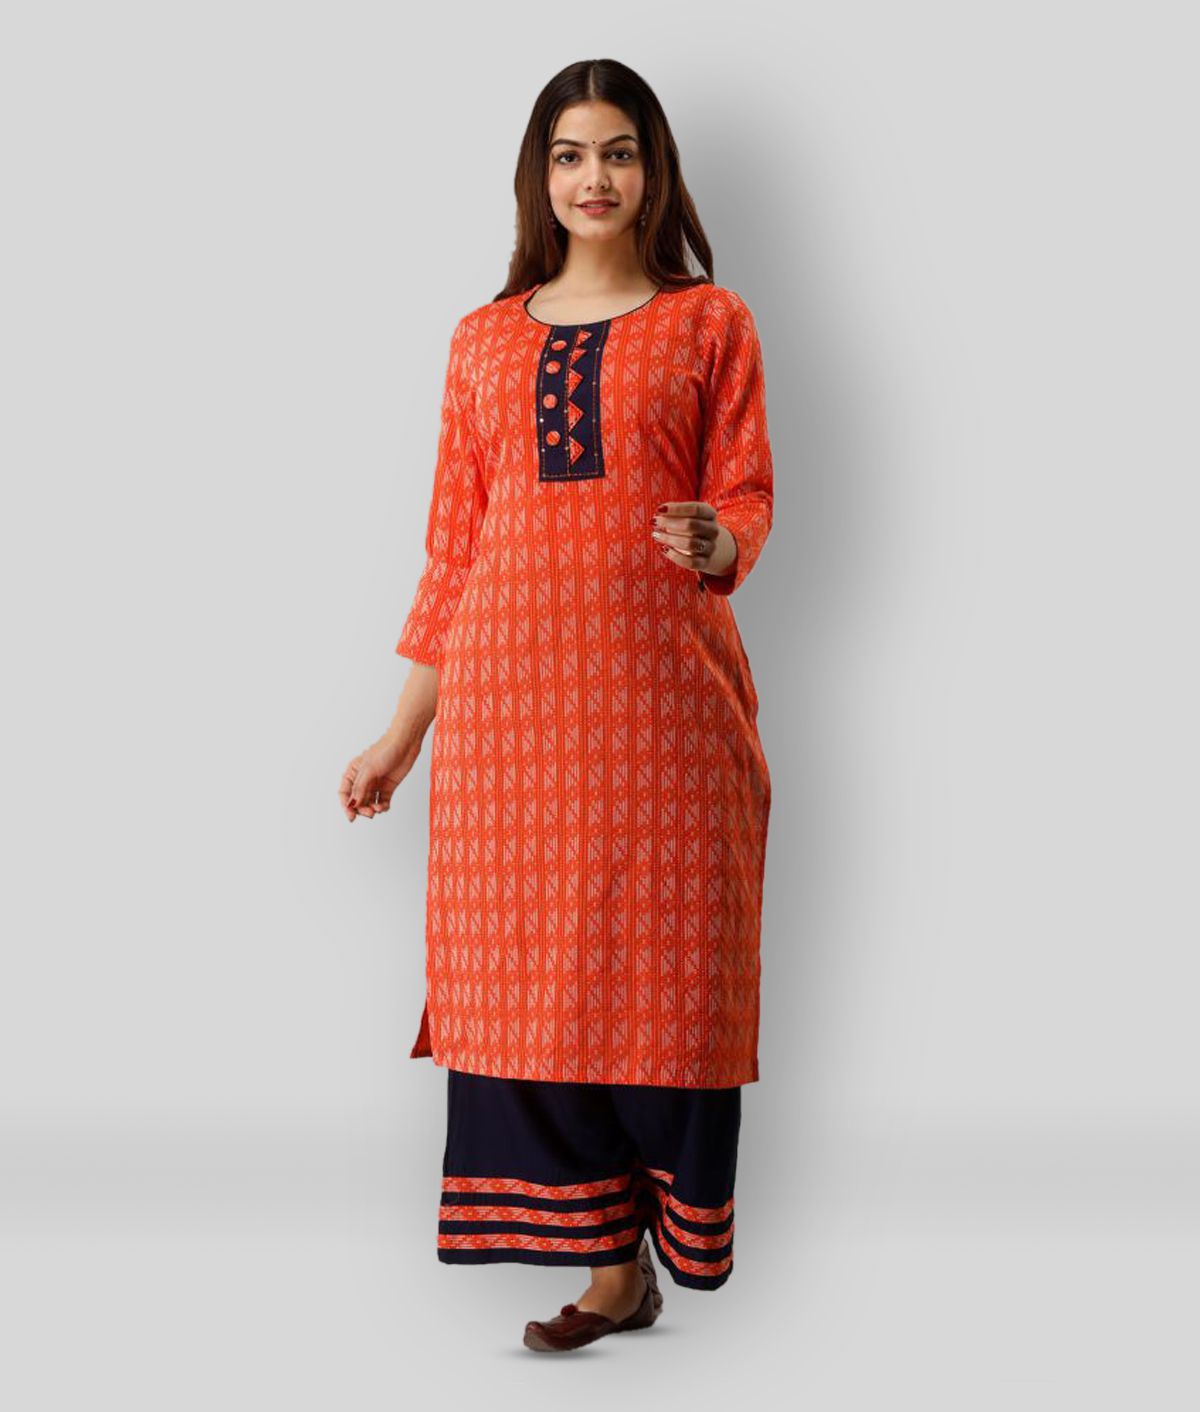     			Frionkandy - Orange Straight Cotton Women's Stitched Salwar Suit ( Pack of 1 )